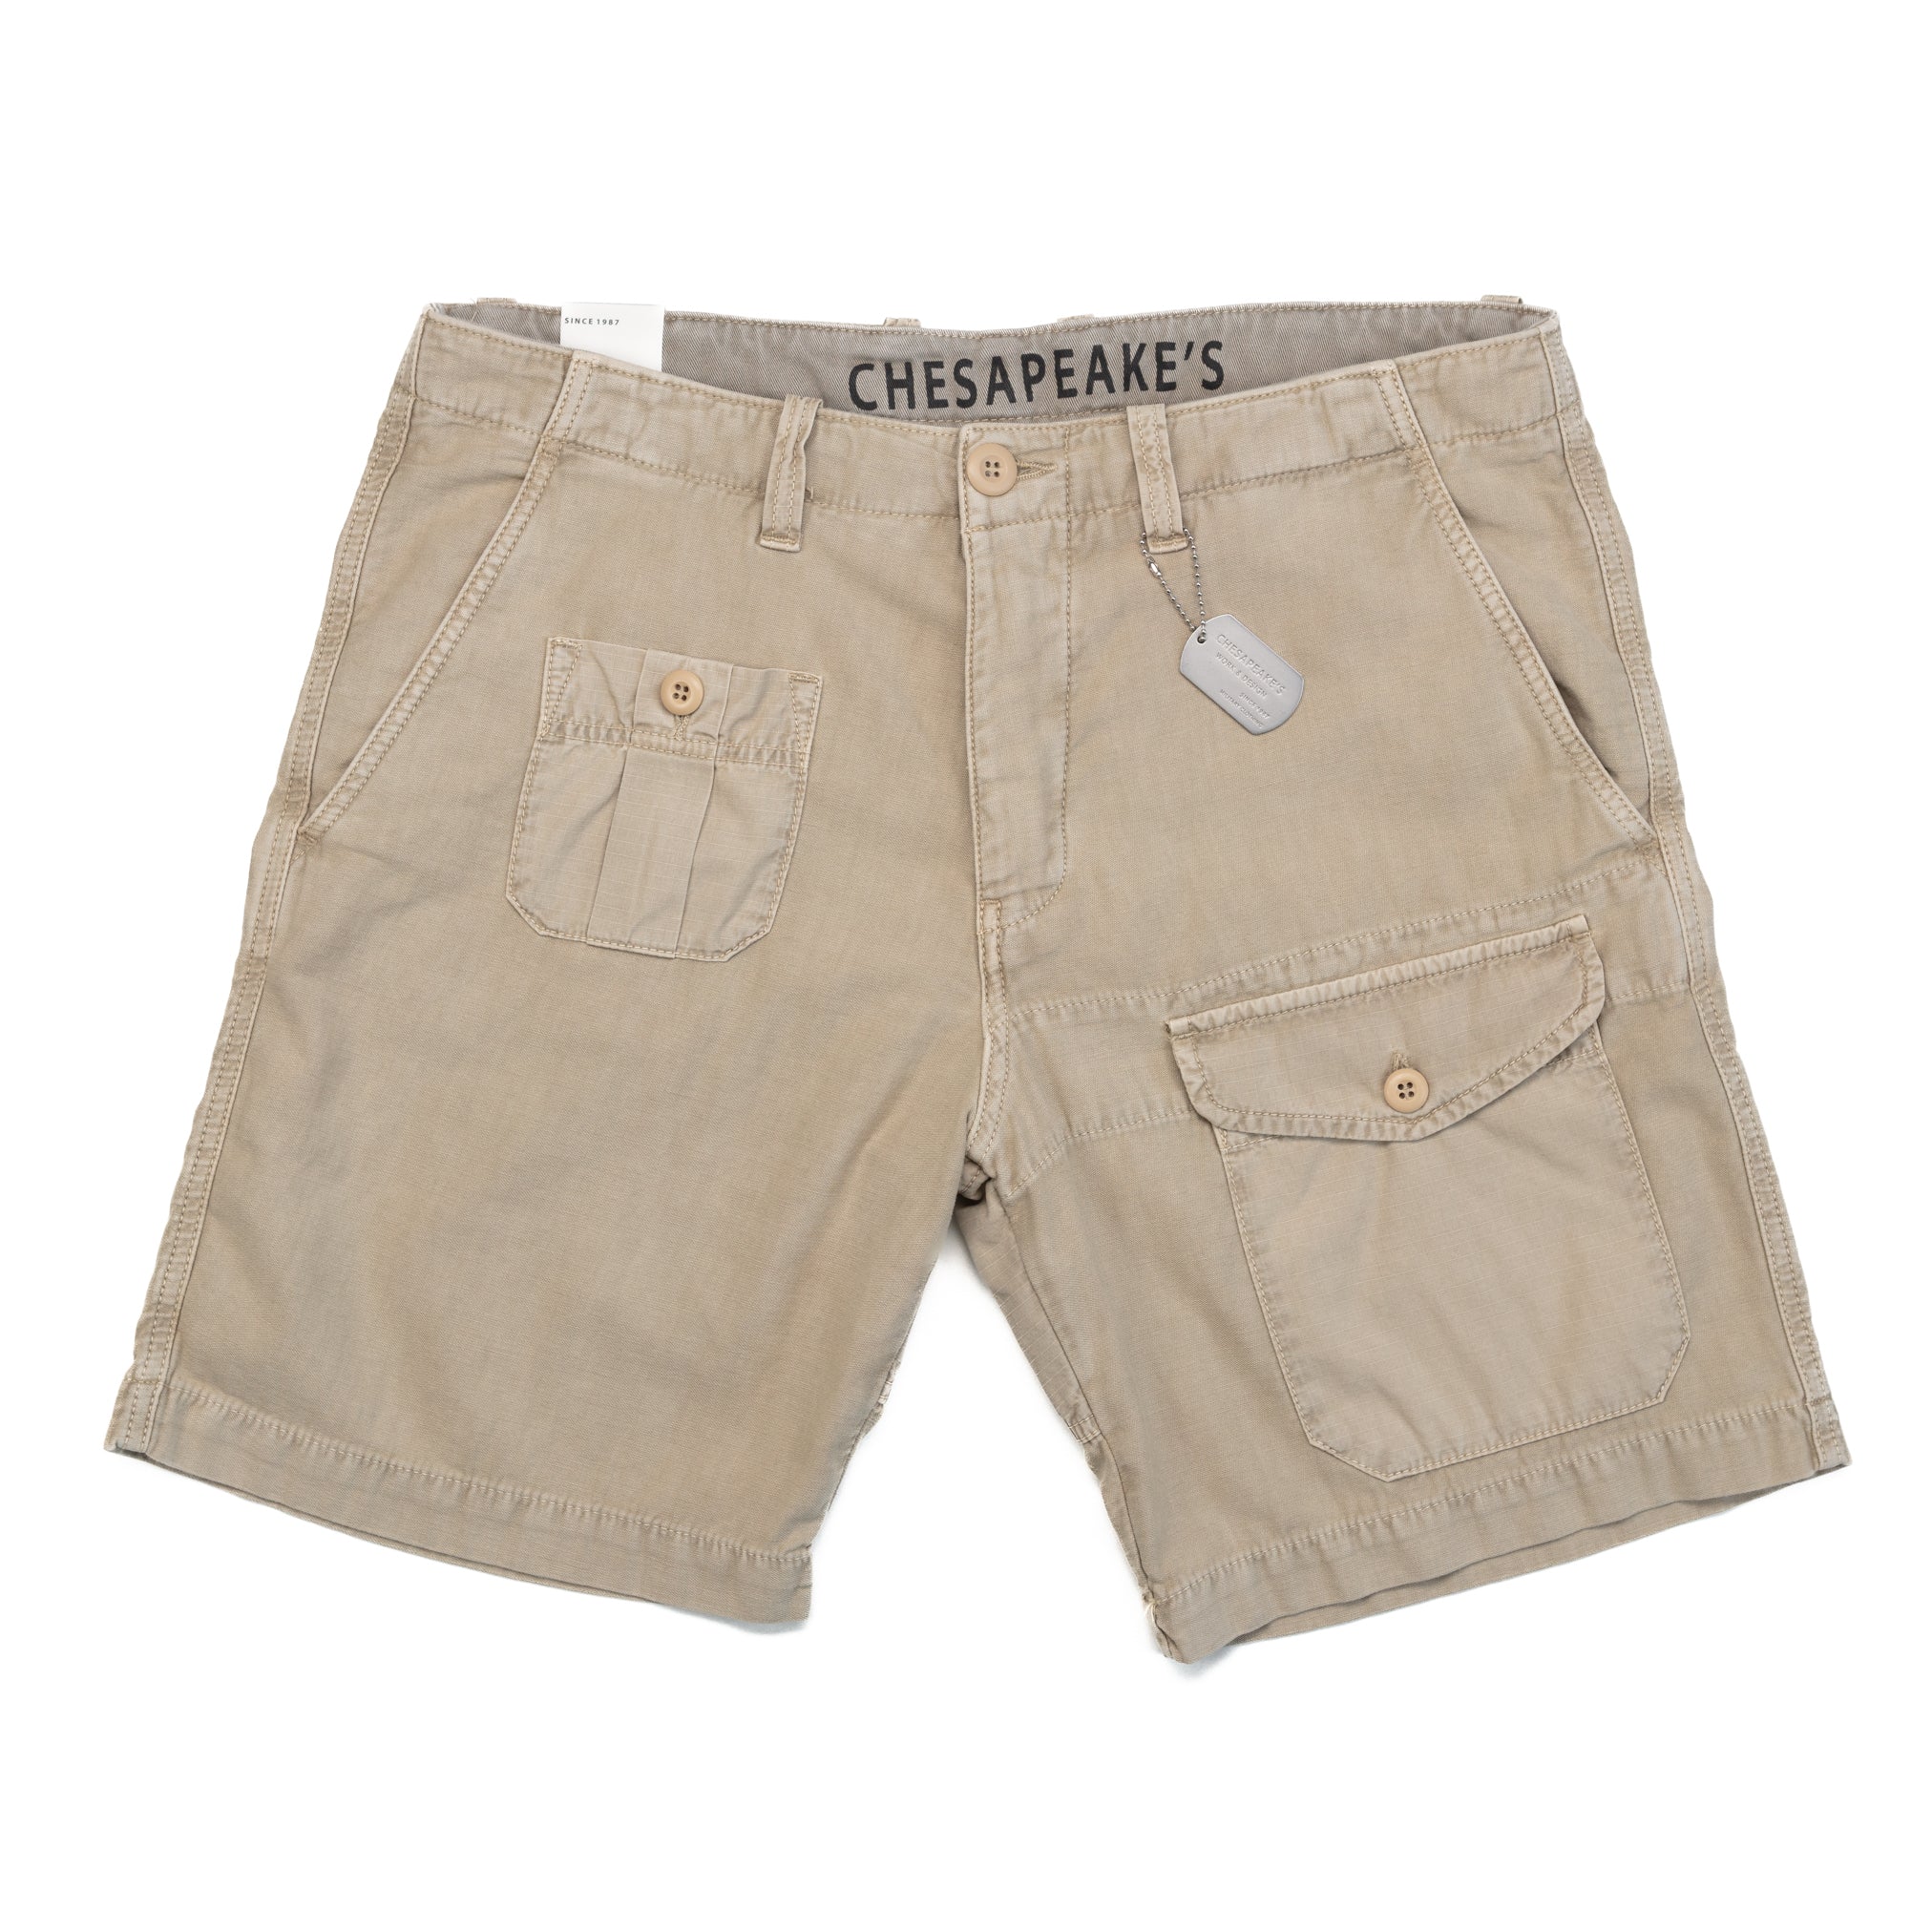 Harbour Deck Shorts in Sand